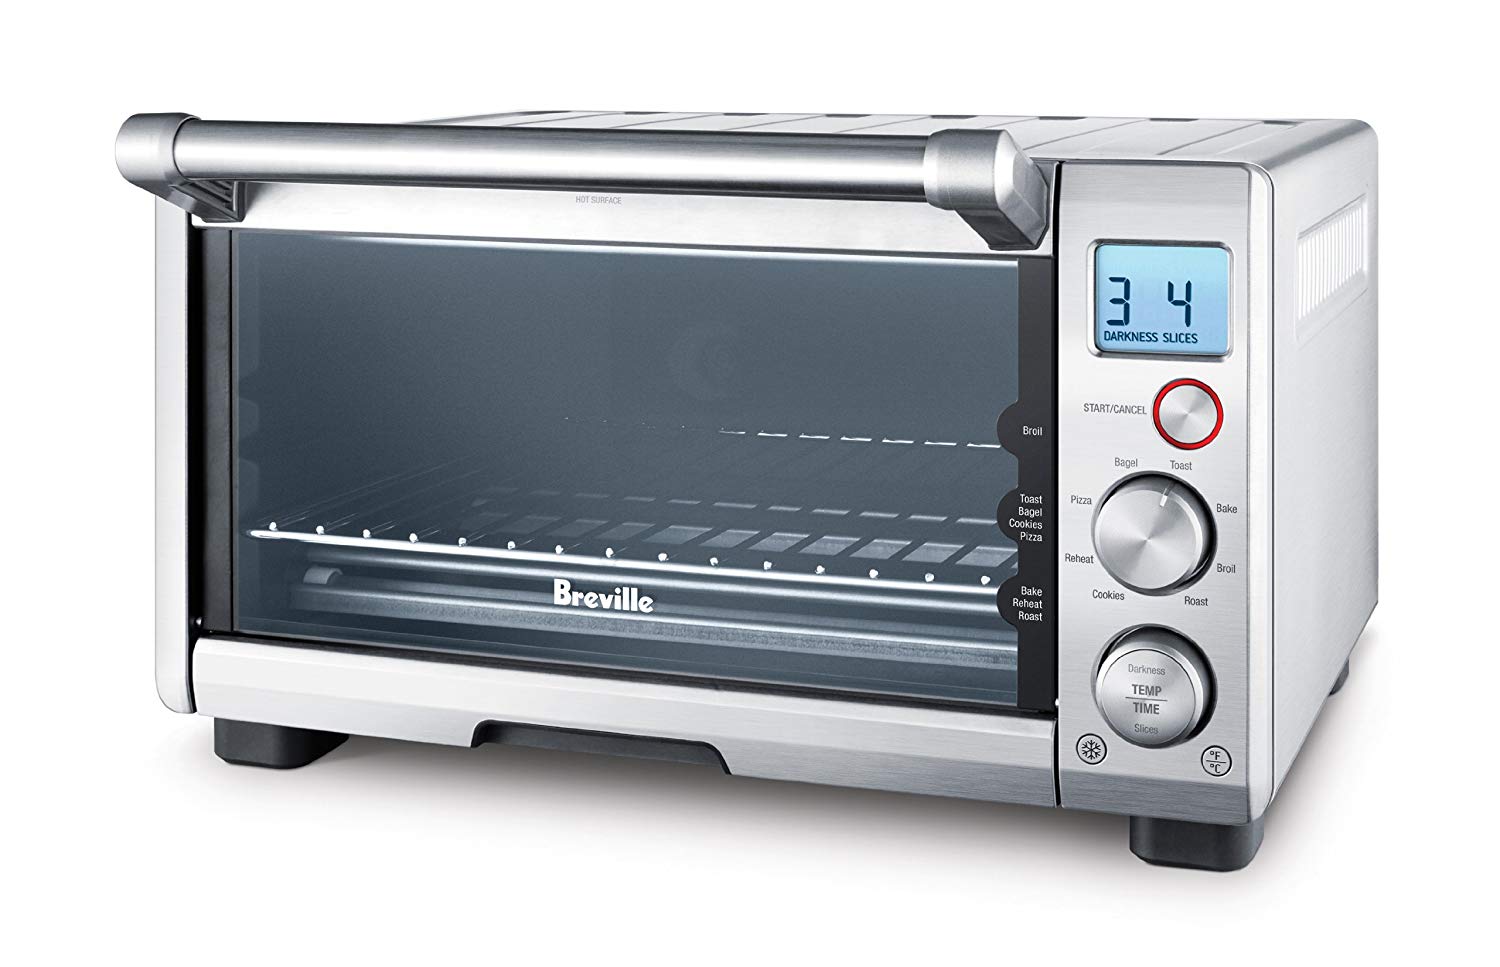 An image related to Breville BOV650XL Silver Countertop Compact Four Slice Toaster Oven